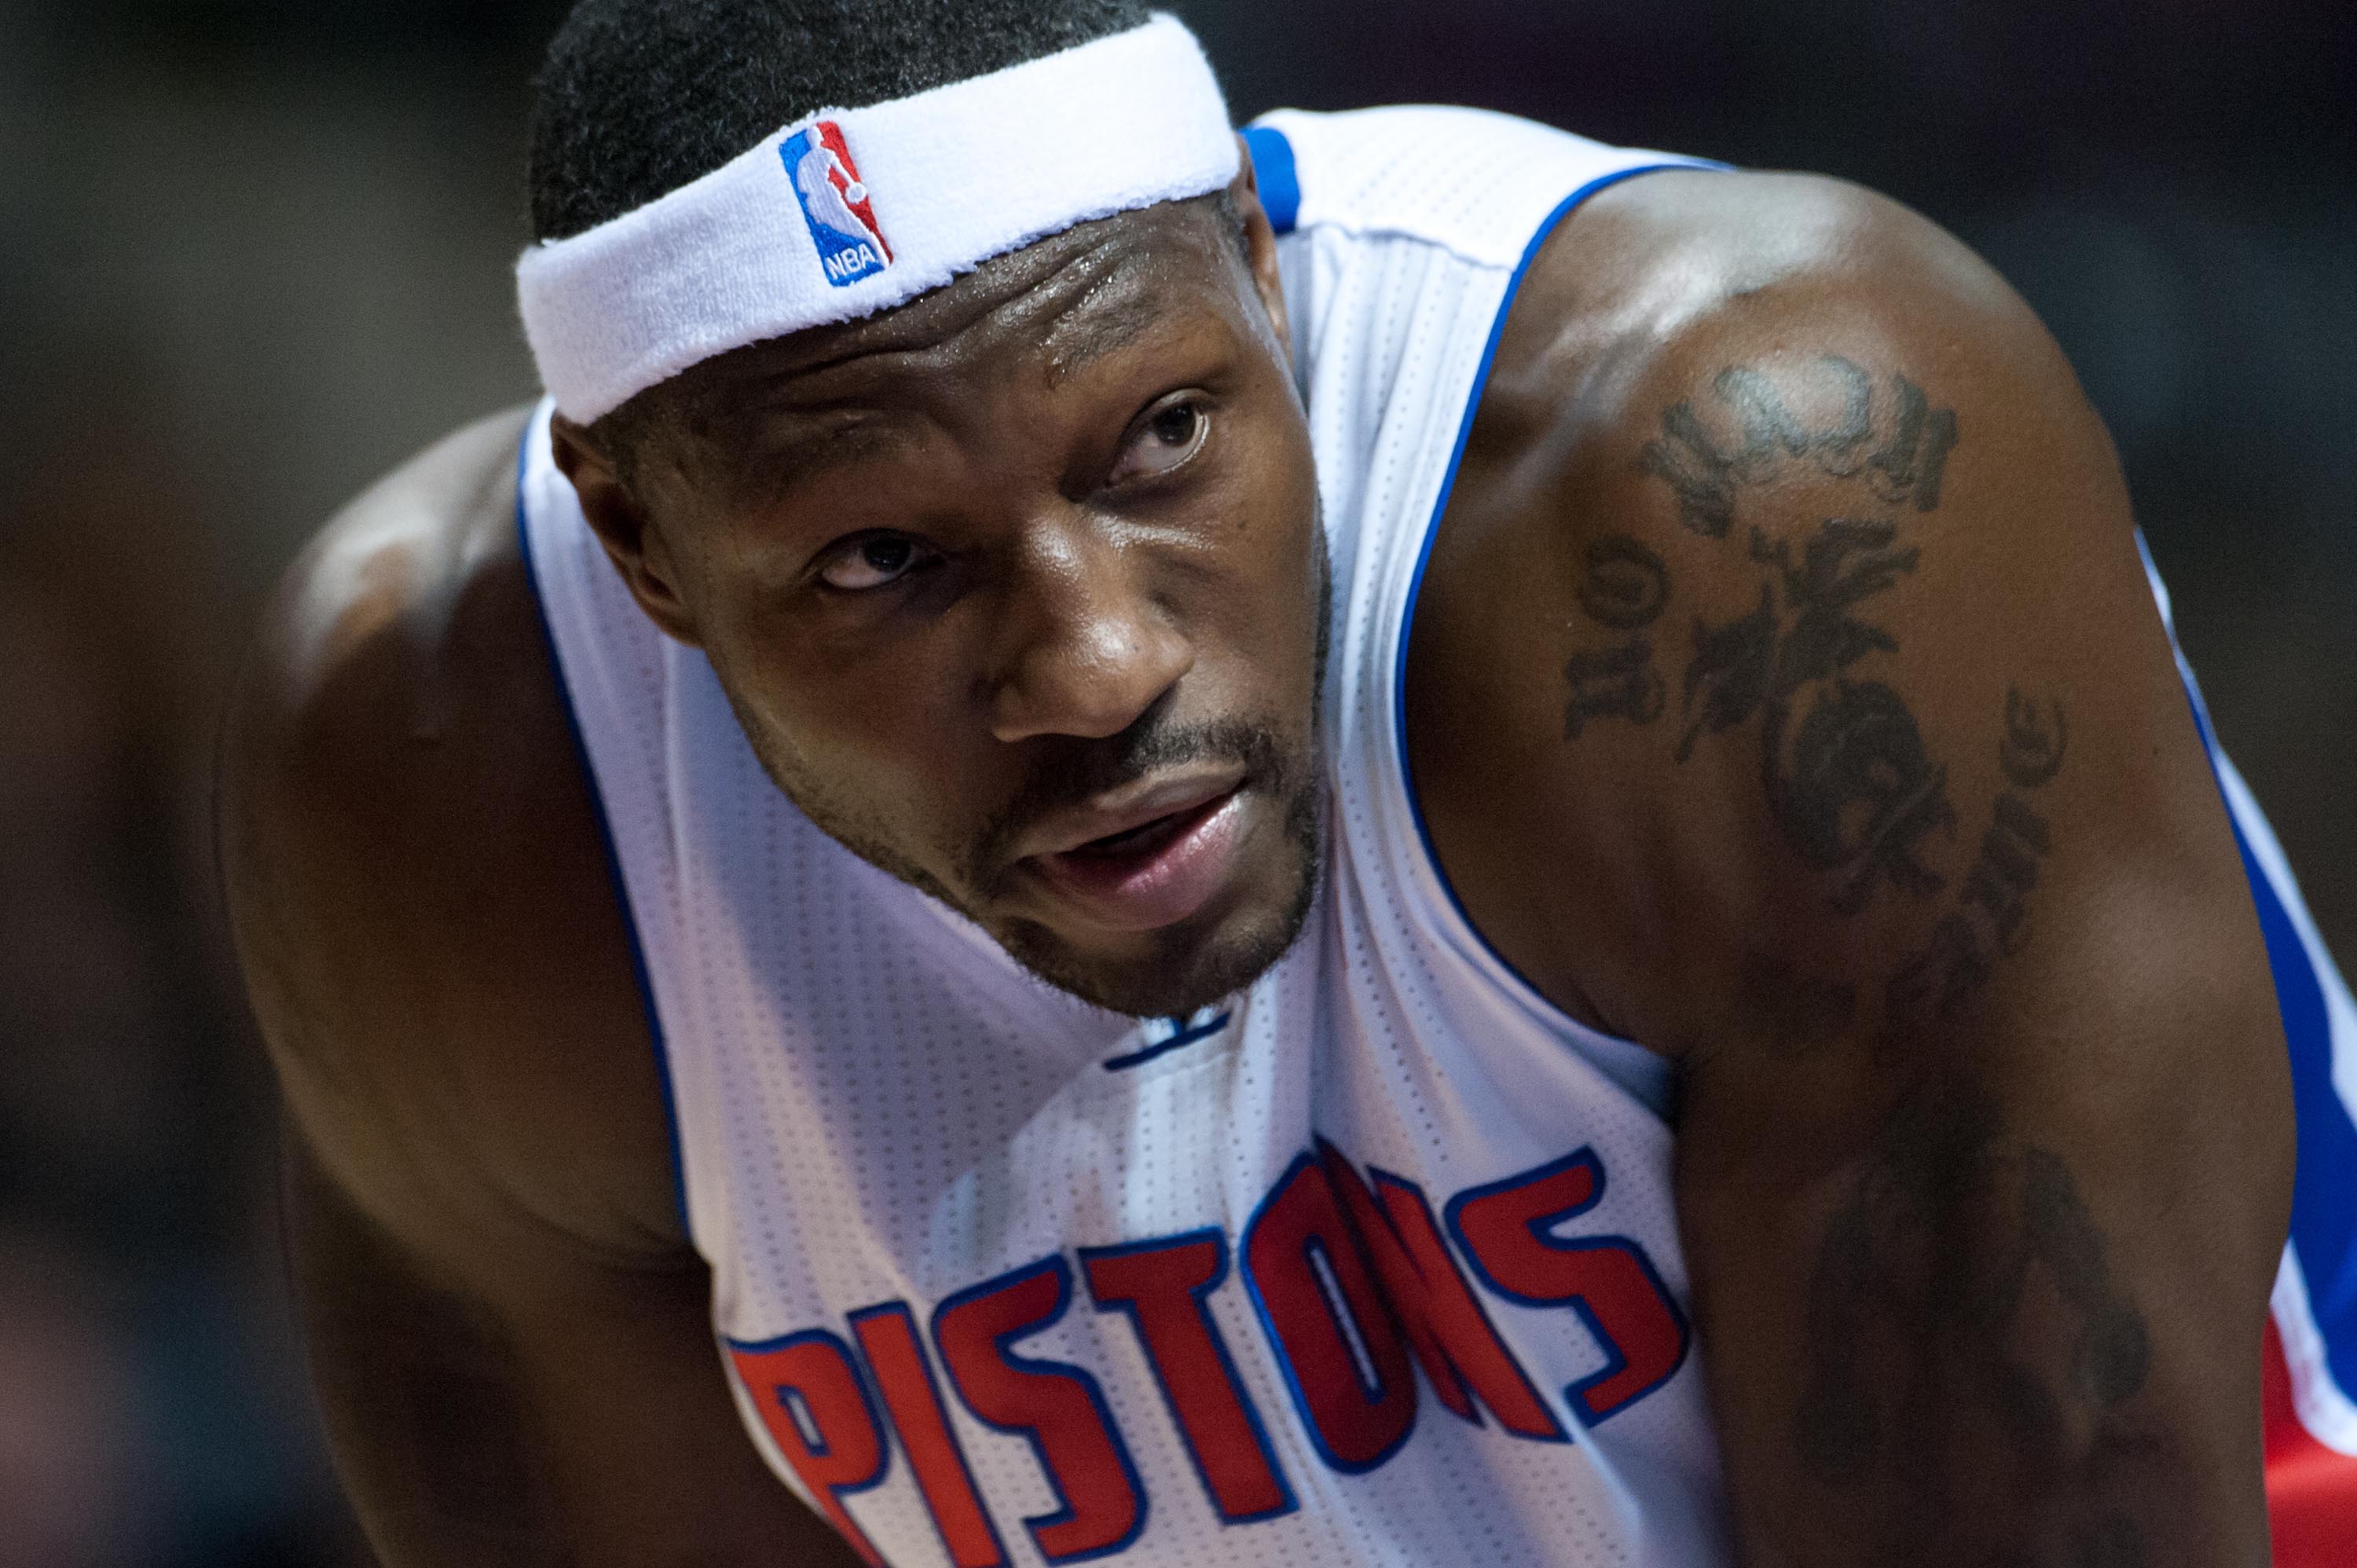 The 10 Greatest Detroit Pistons in the NBA Hall of Fame